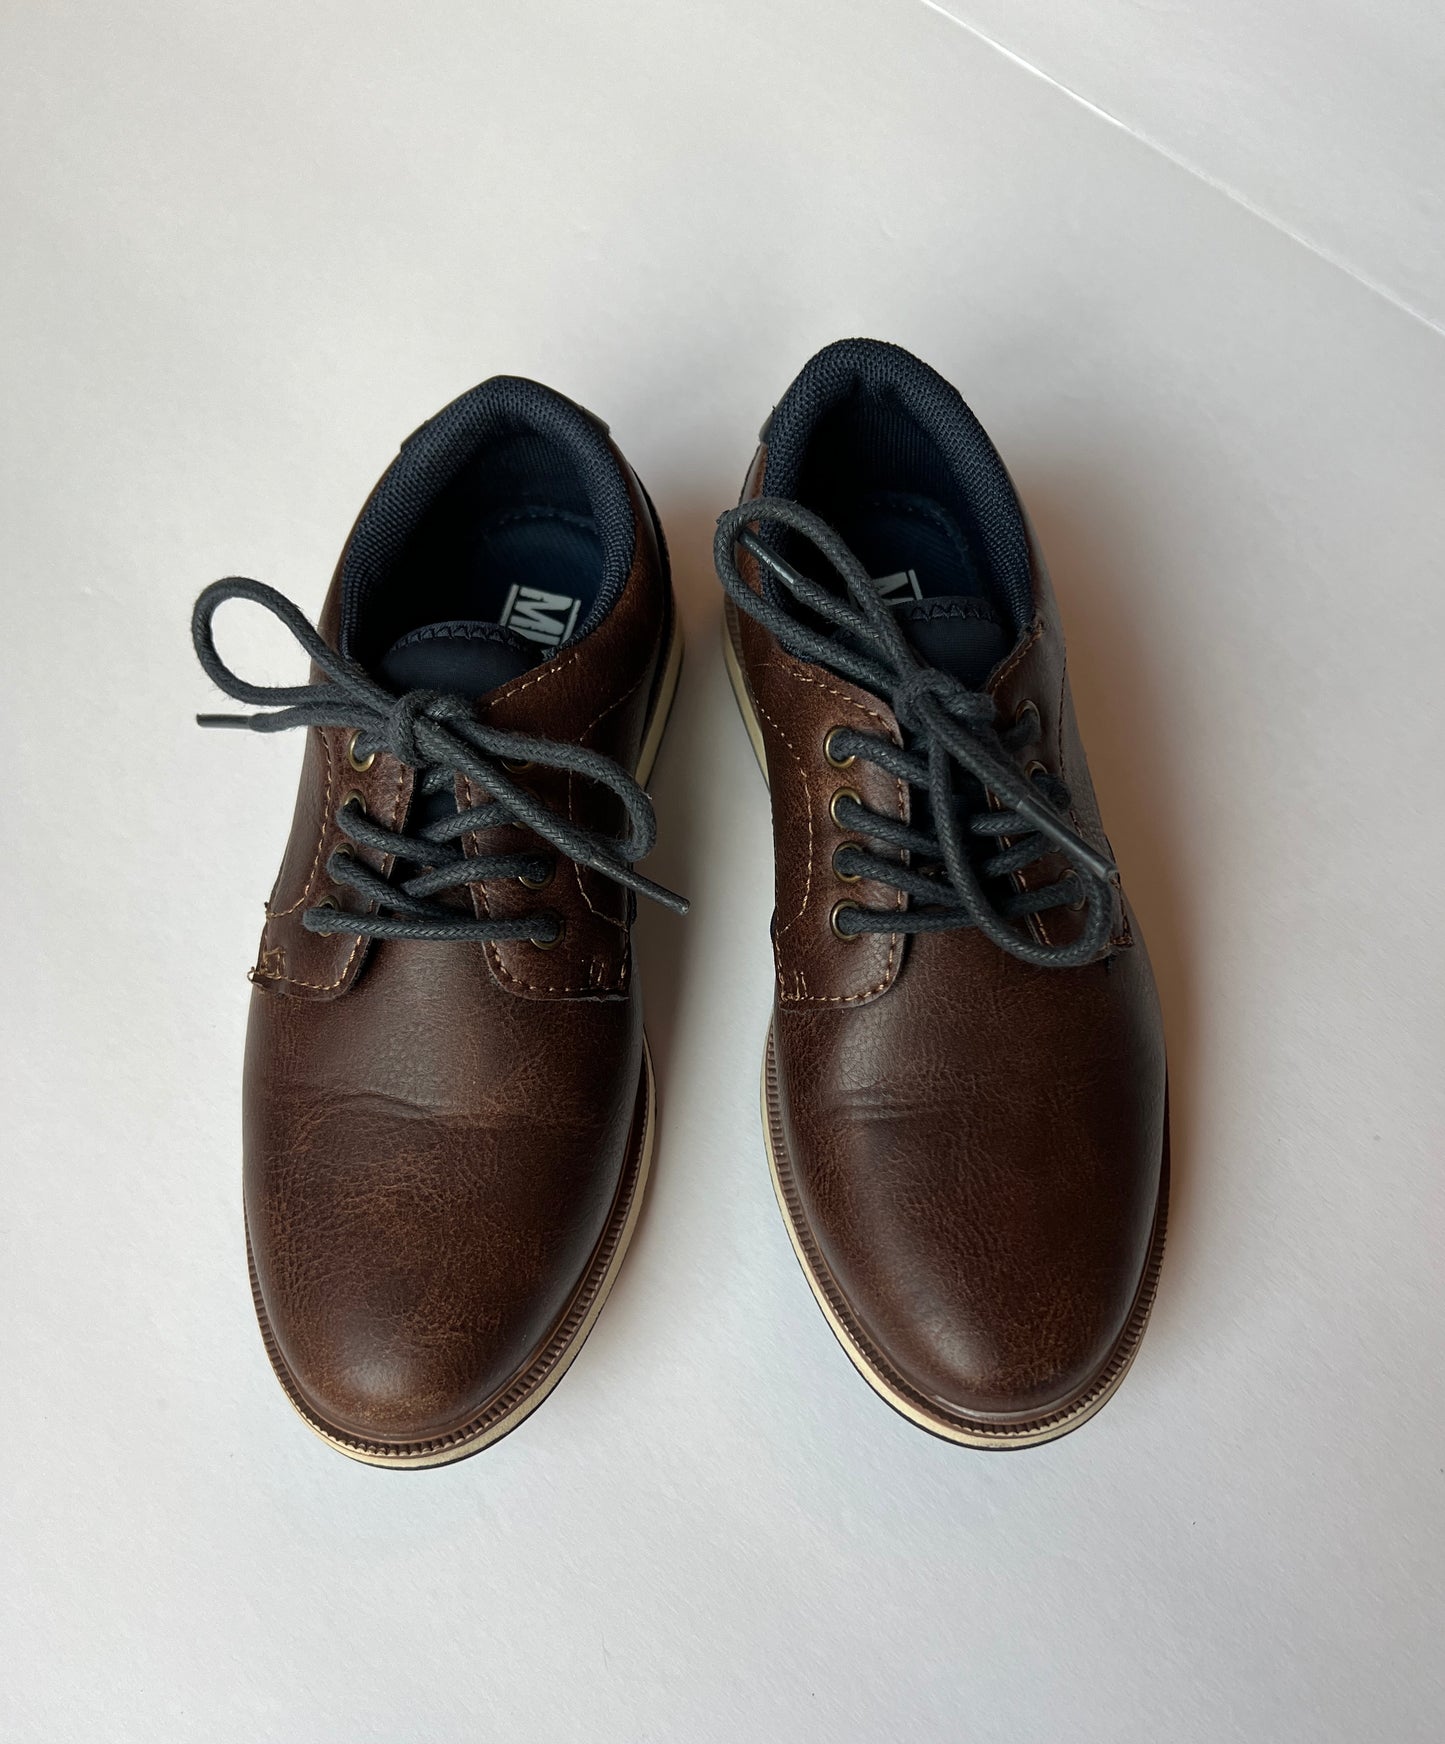 Boy Shoe Size 13 Brown Leather with Navy Accents Oxford, Like new Reduced